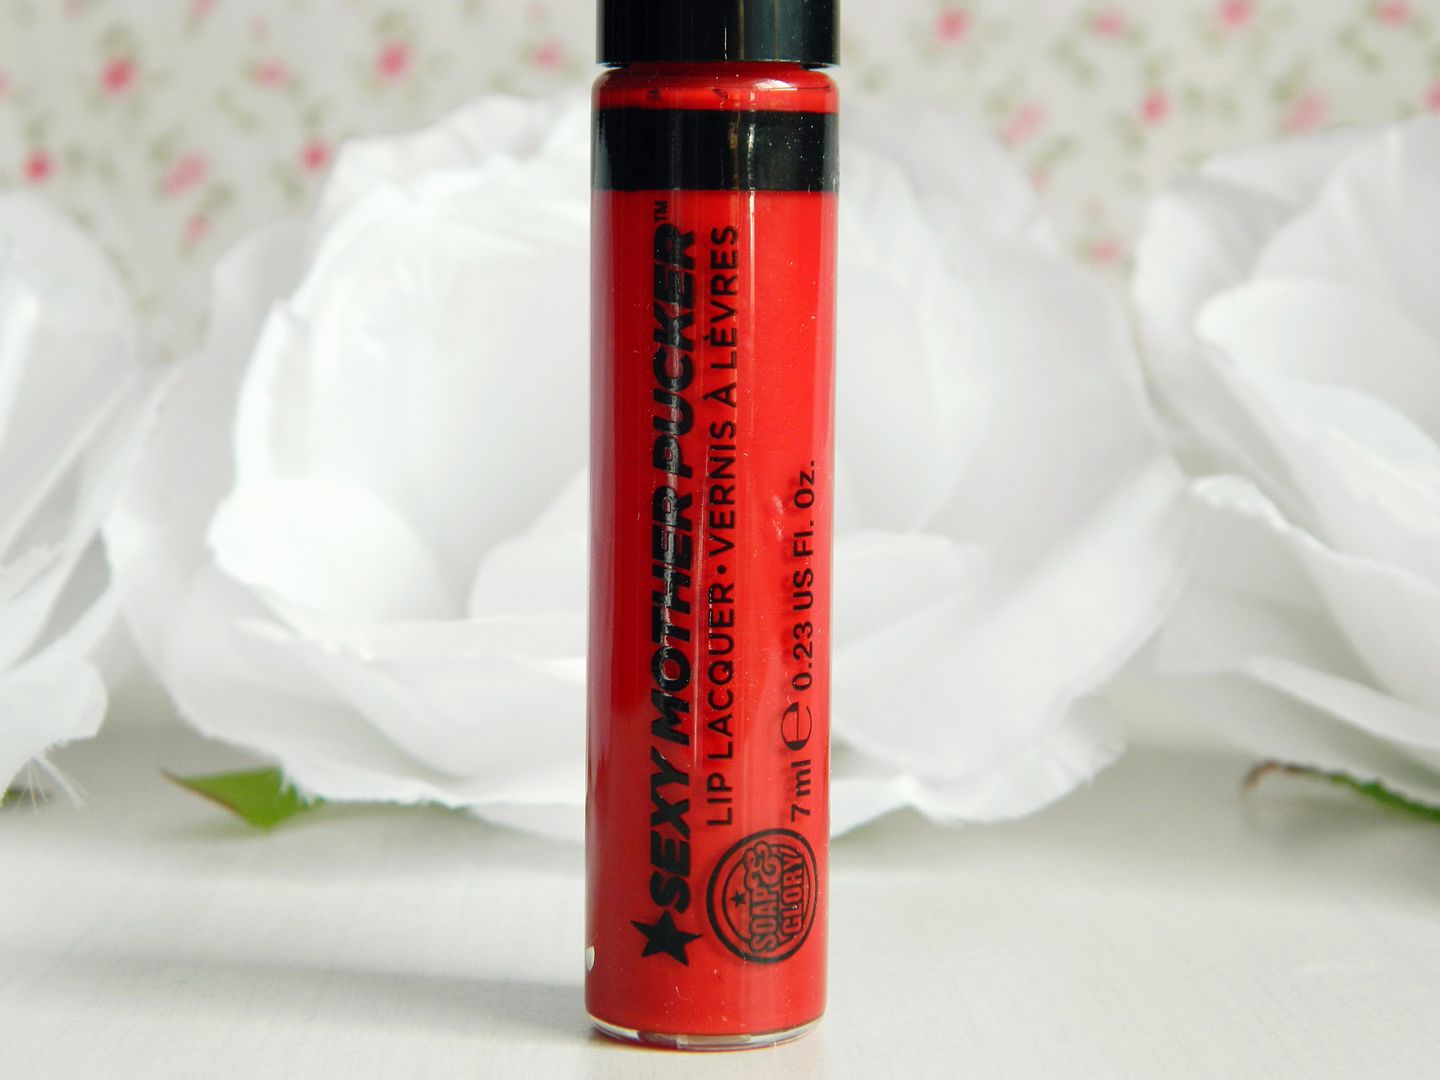 Soap & Glory Sexy Mother Pucker Lip Shine Lacquer In Riot Review Belle-amie UK Beauty Fashion Lifestyle Blog